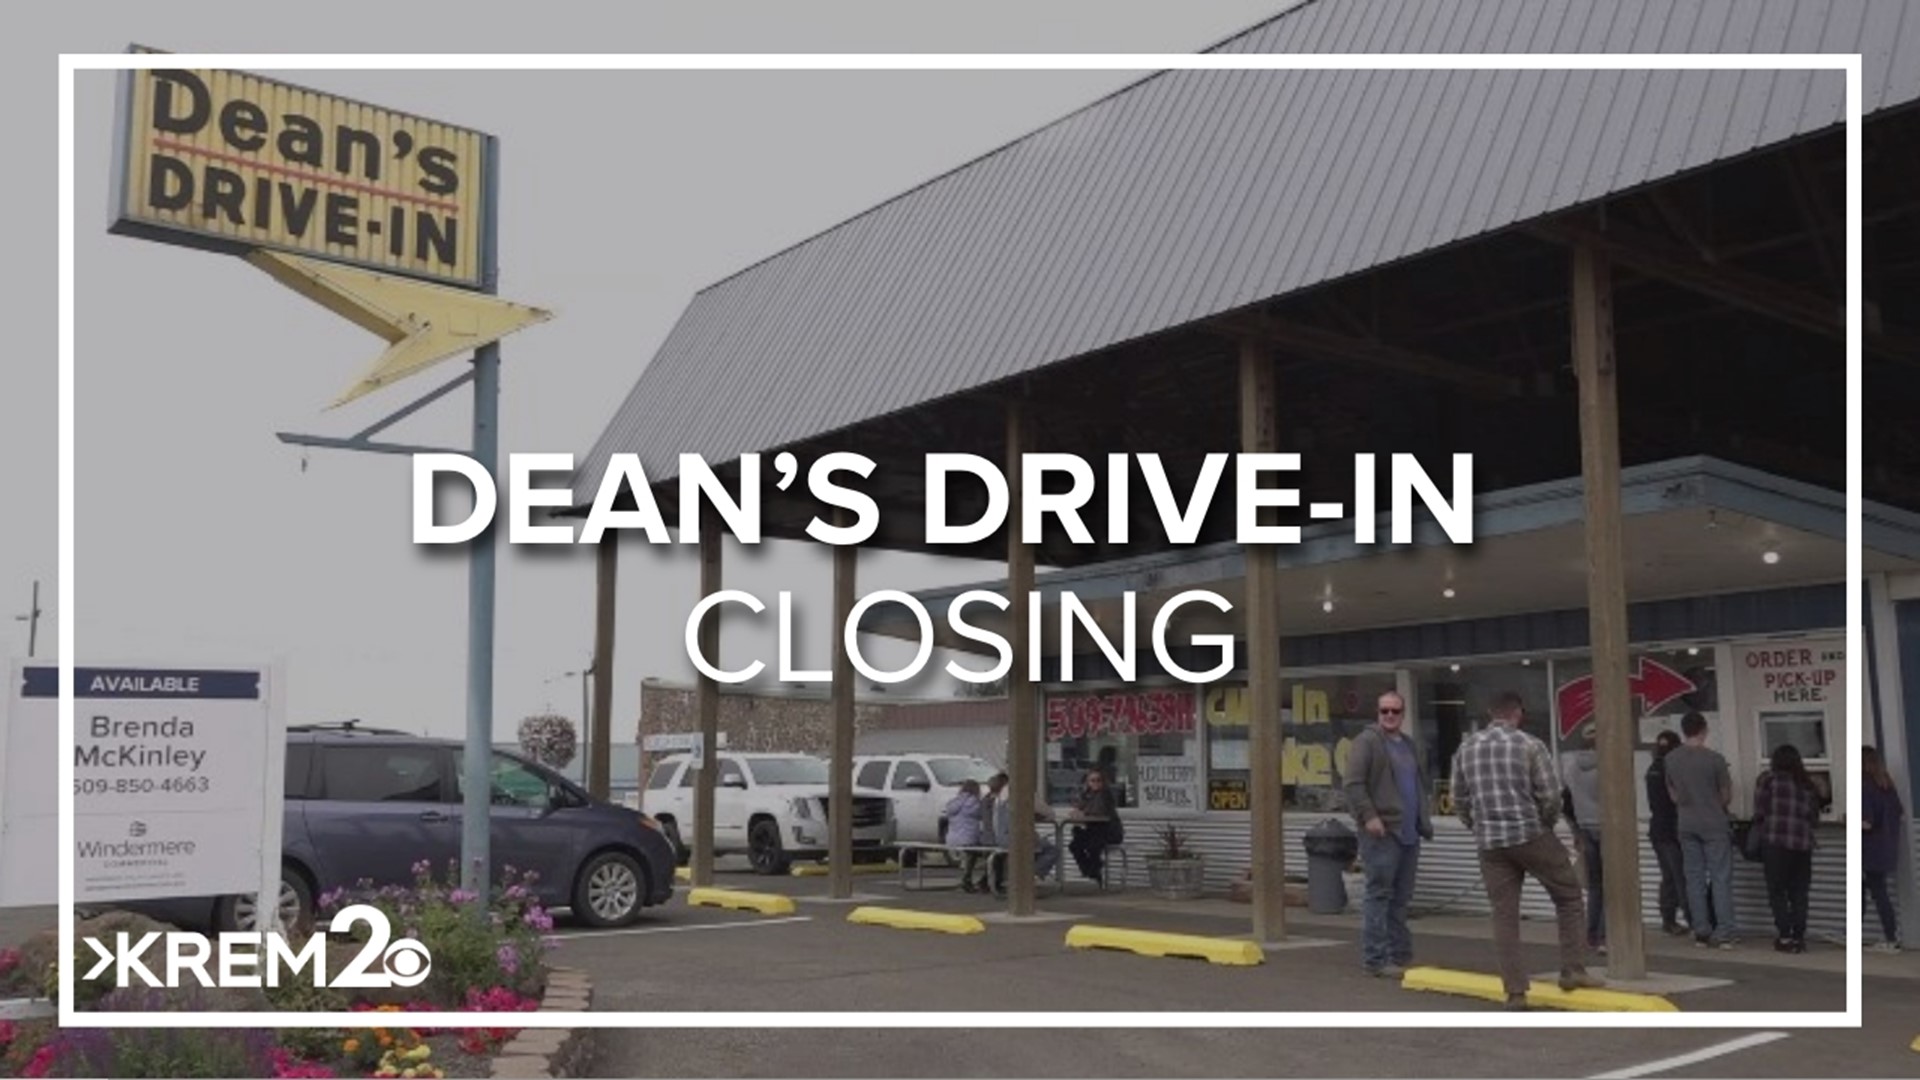 Over the years, Dean's Drive-In hired about 100 employees. All became extended family.